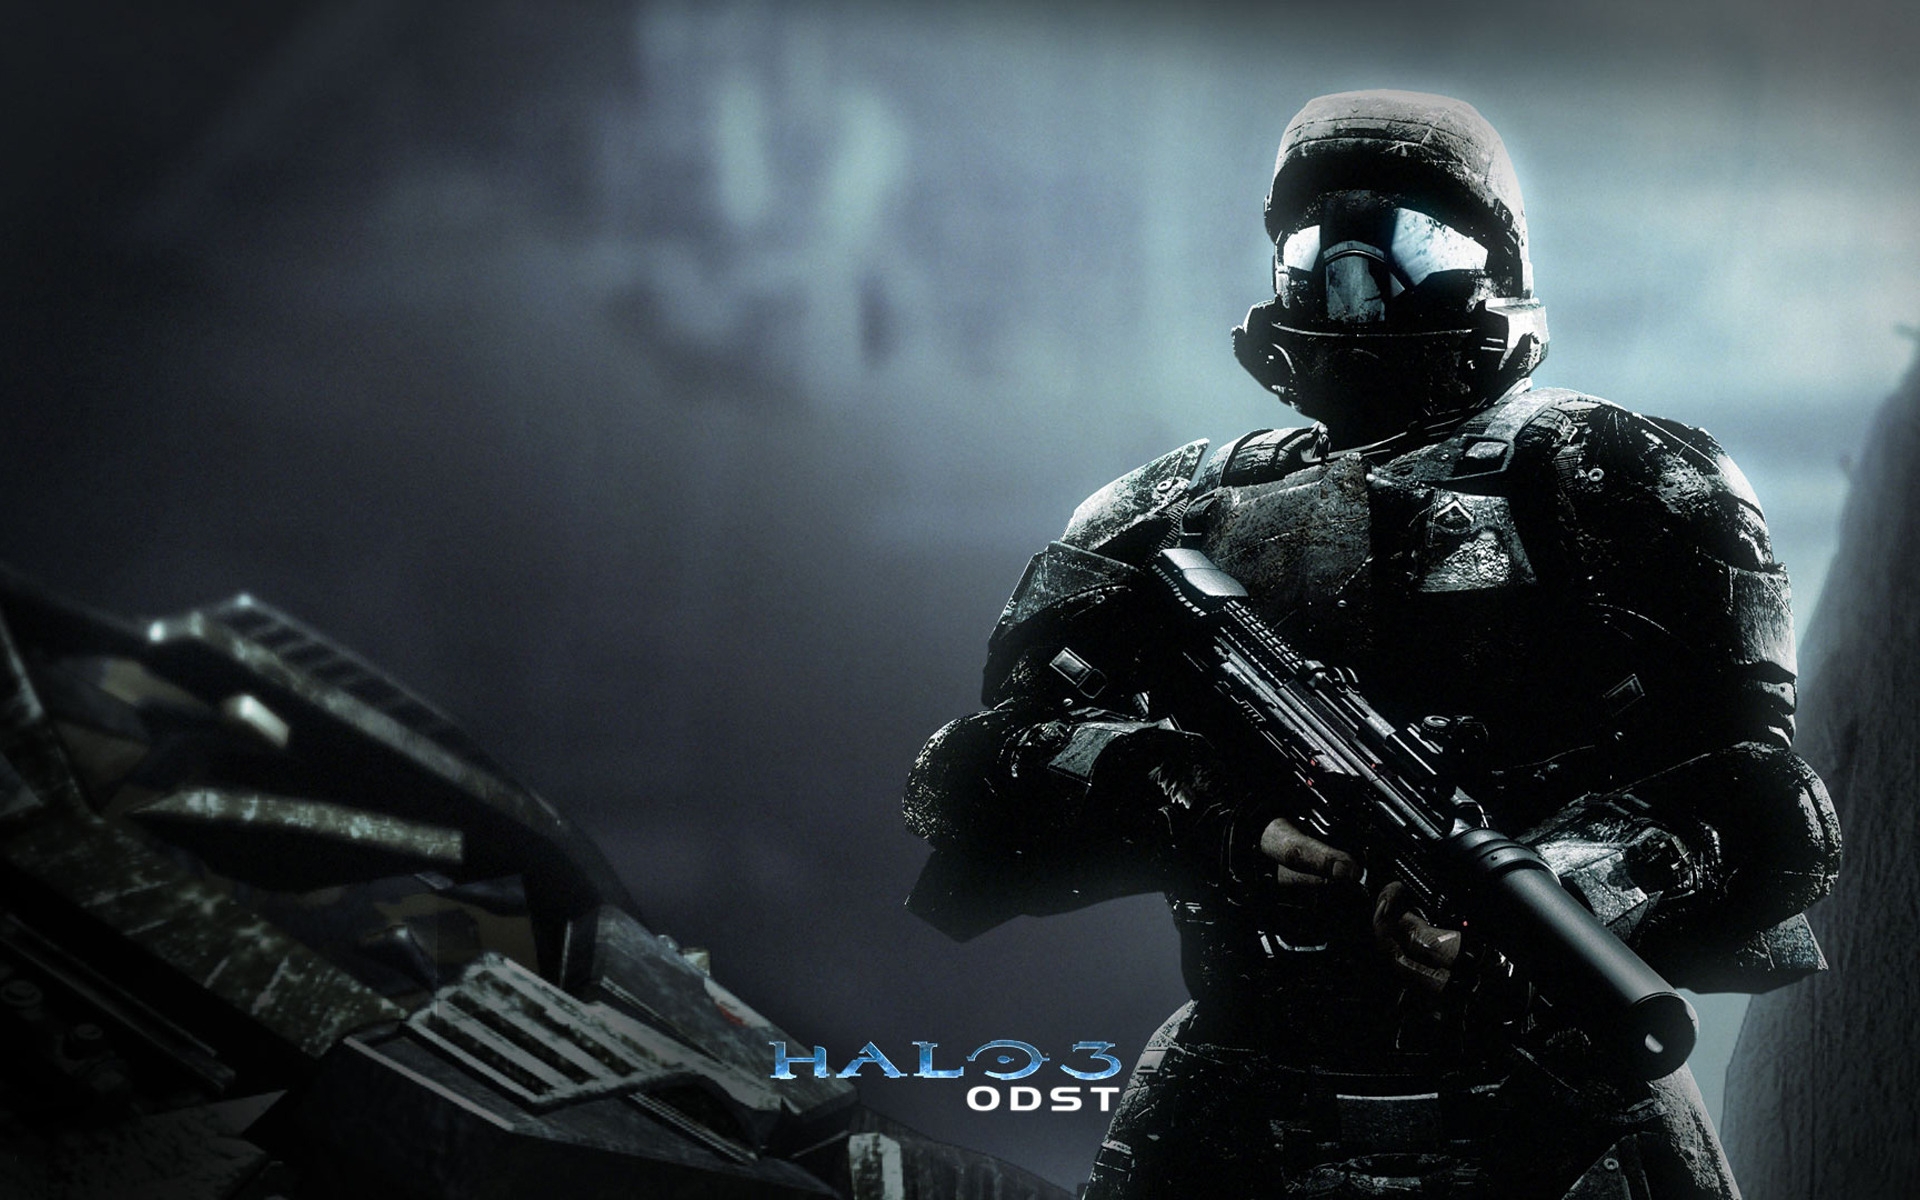 Halo 3 ODST for 1920 x 1200 widescreen resolution